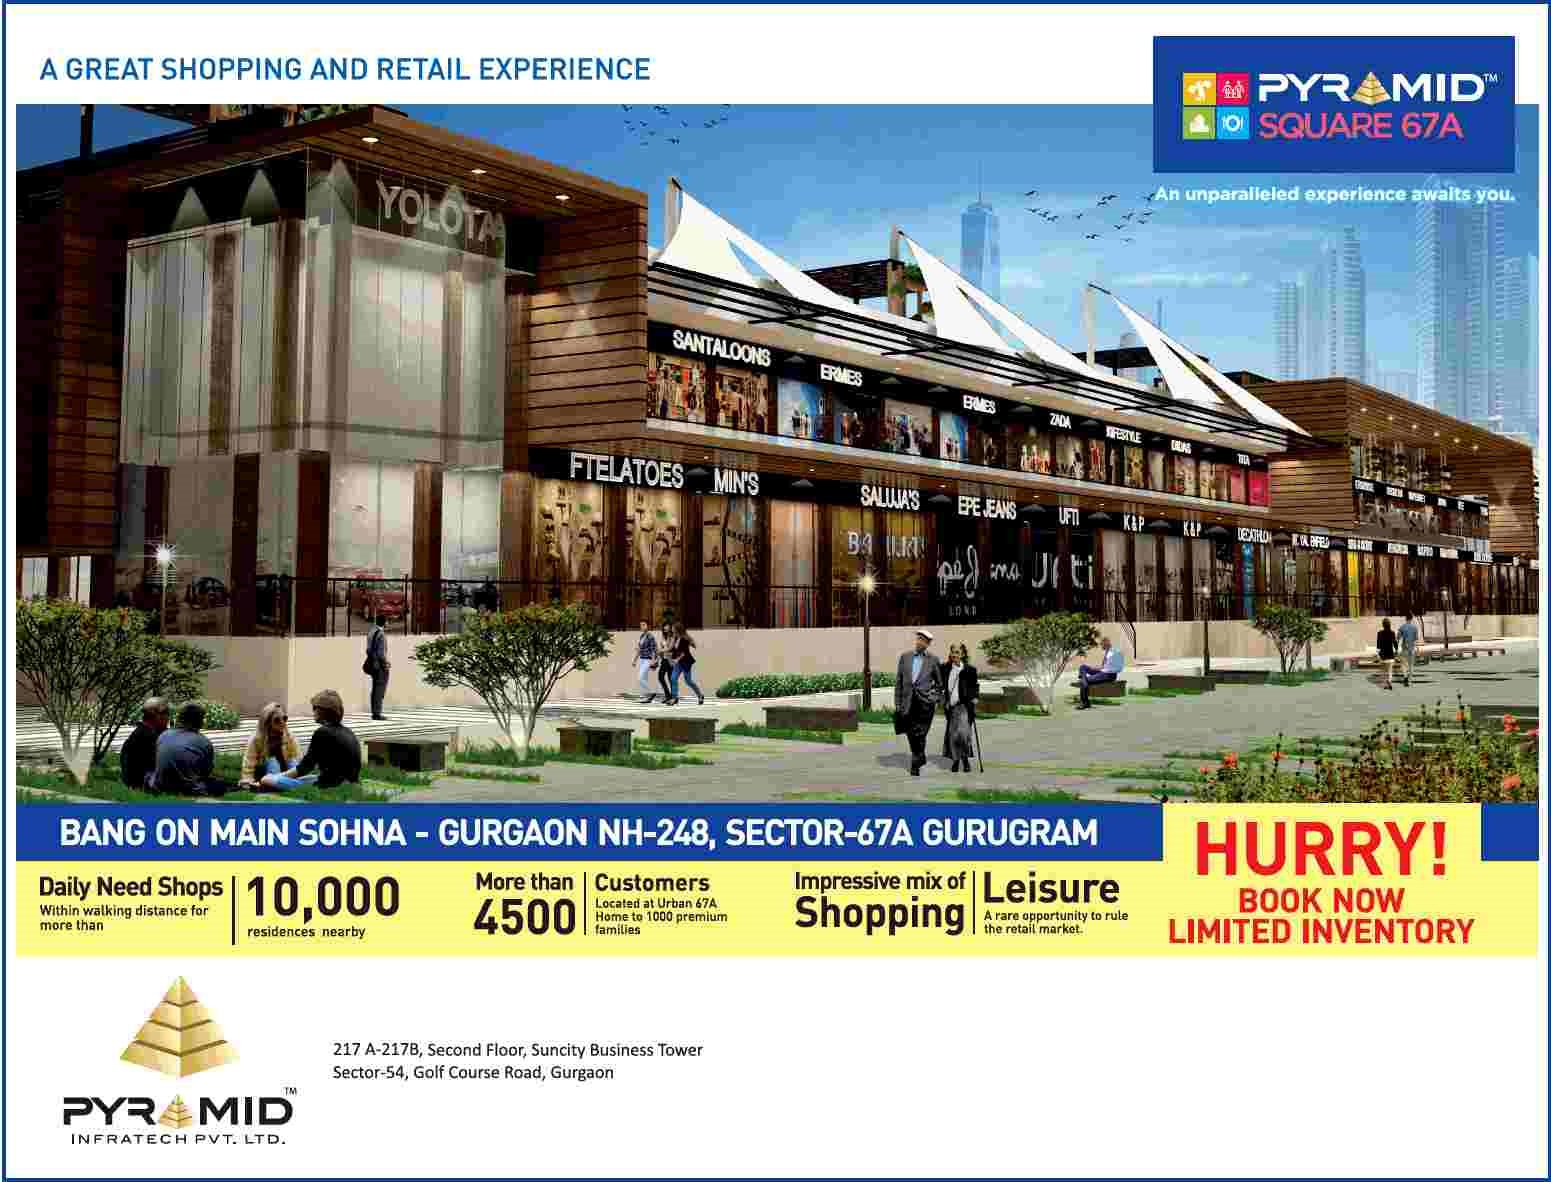 Presenting great shopping & retail experience at Pyramid Square 67A in Gurgaon